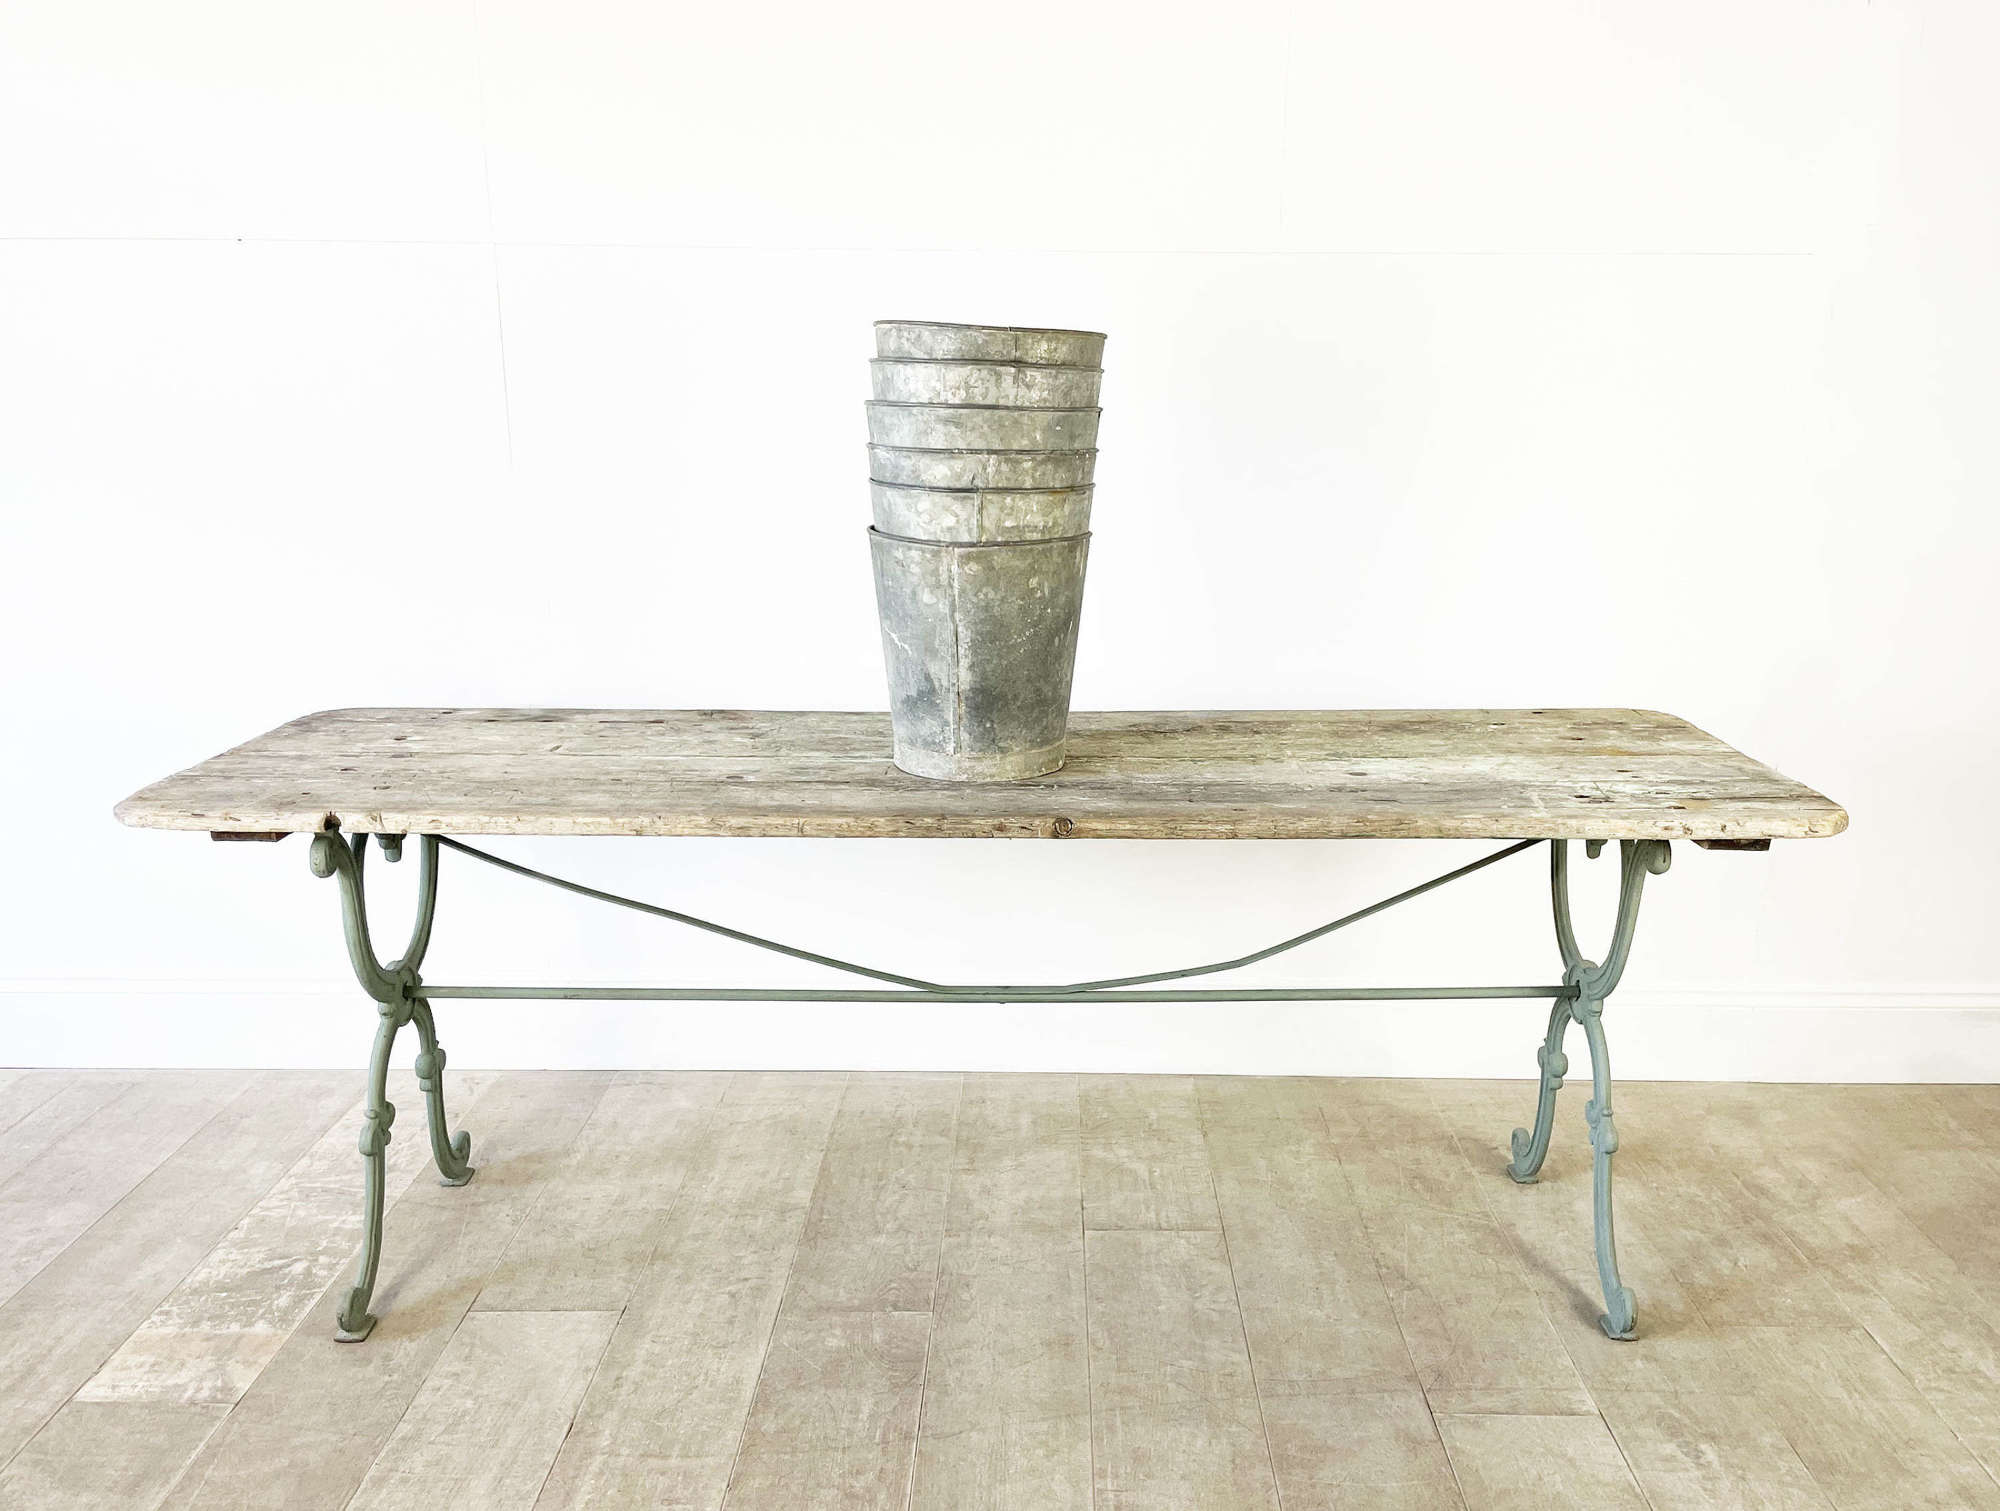 French Cast Iron Table with old and worn wooden top - circa 1900